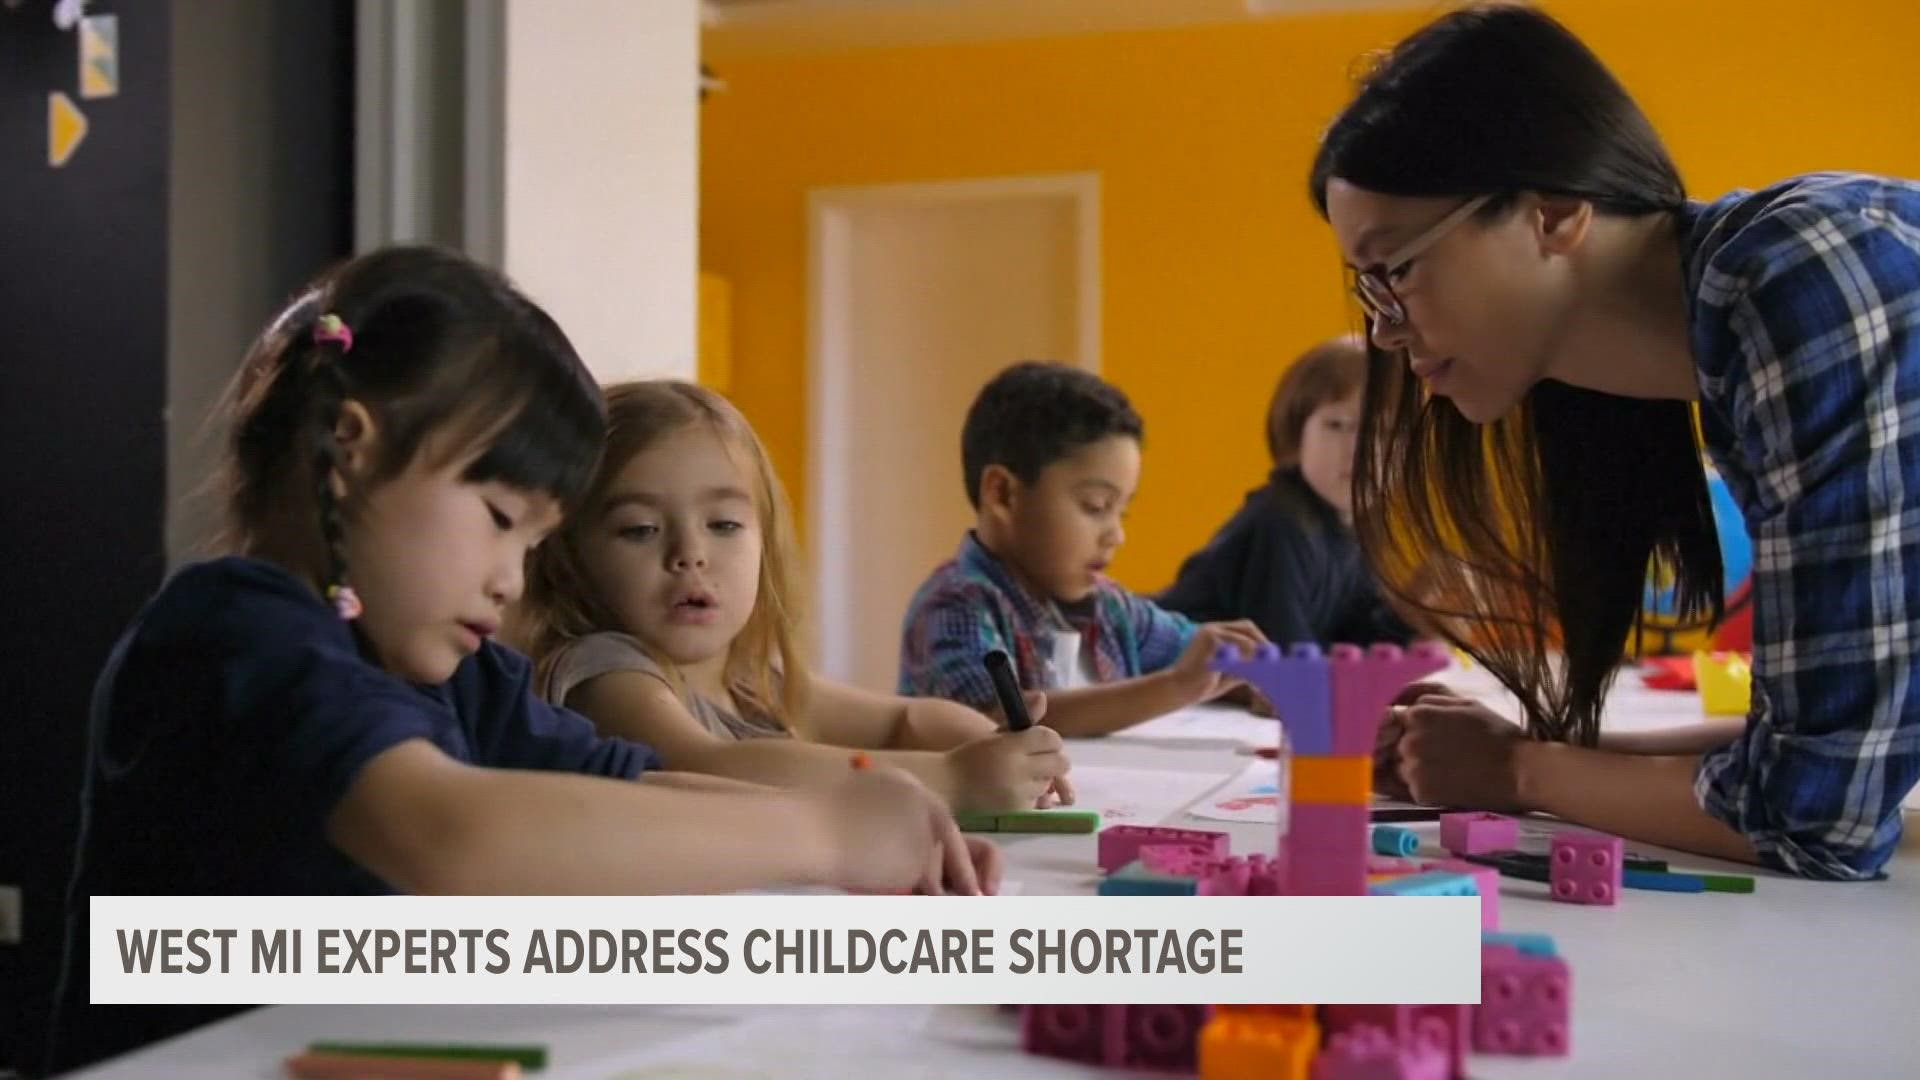 MI has lost 2,000 childcare providers since the start of the pandemic. The state plans to spend $100 million with the goal of opening 1,000 new facilities by 2024.